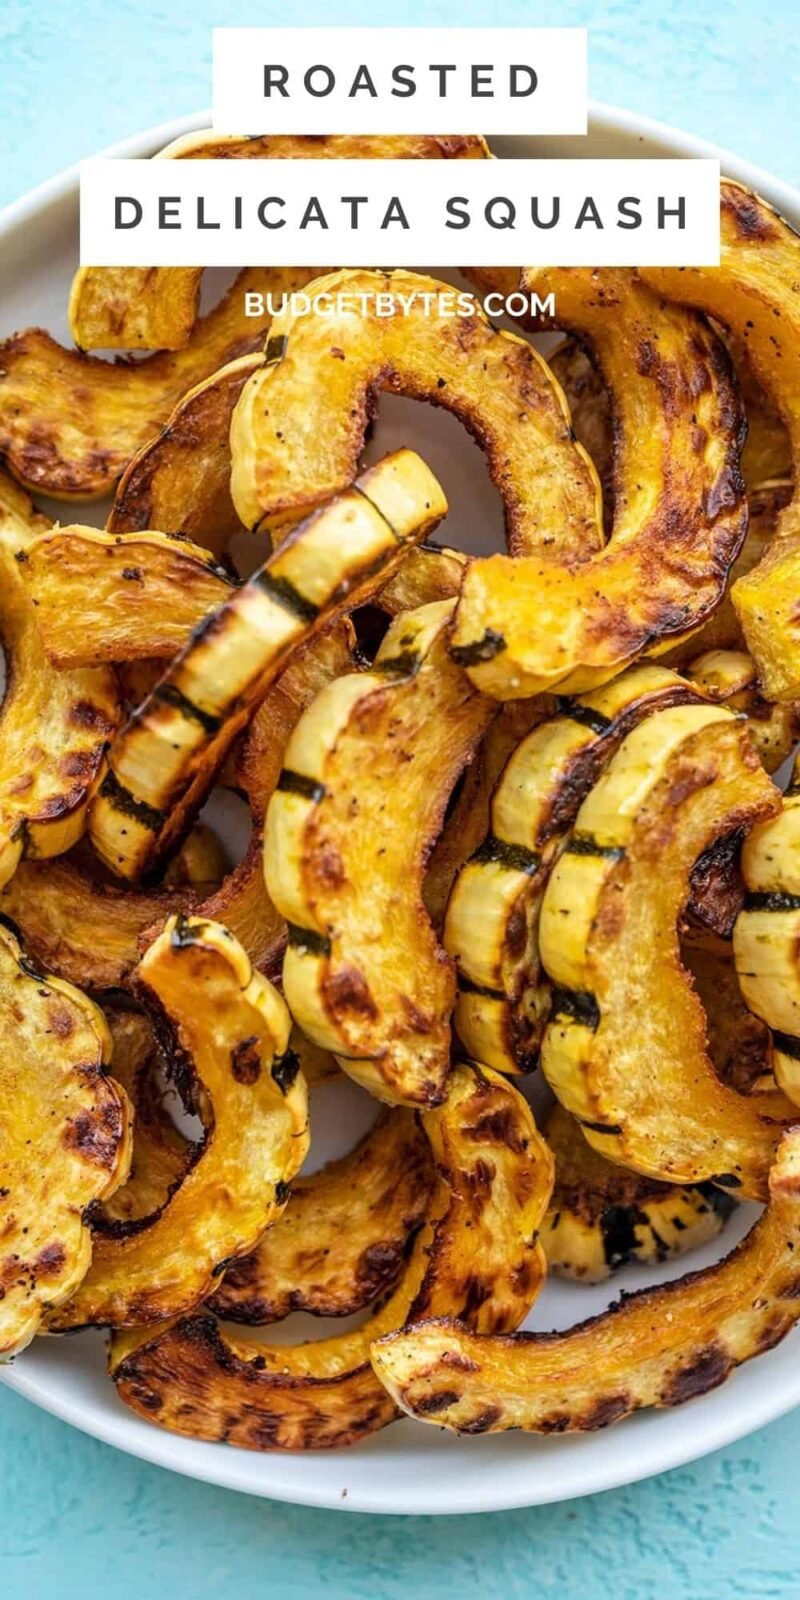 Roasted delicata squash on a plate, title text at the top